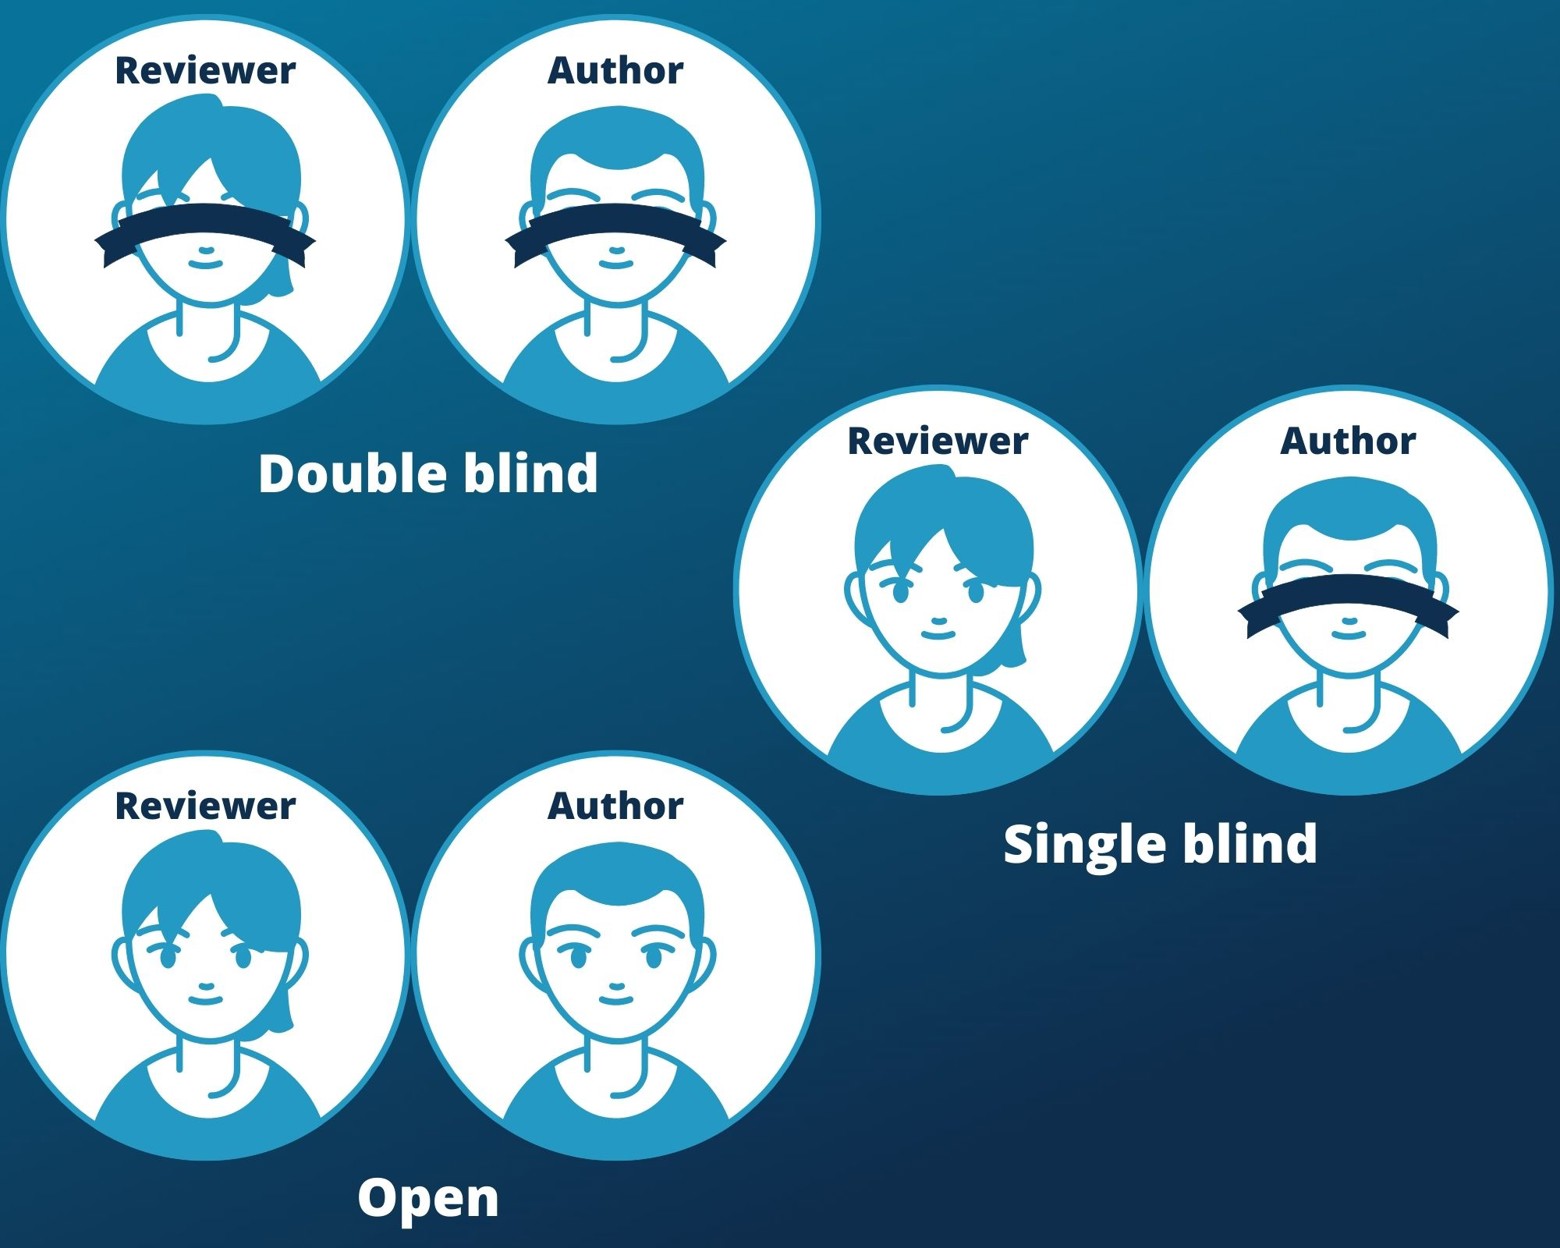 Difference between open, single blind and double blind